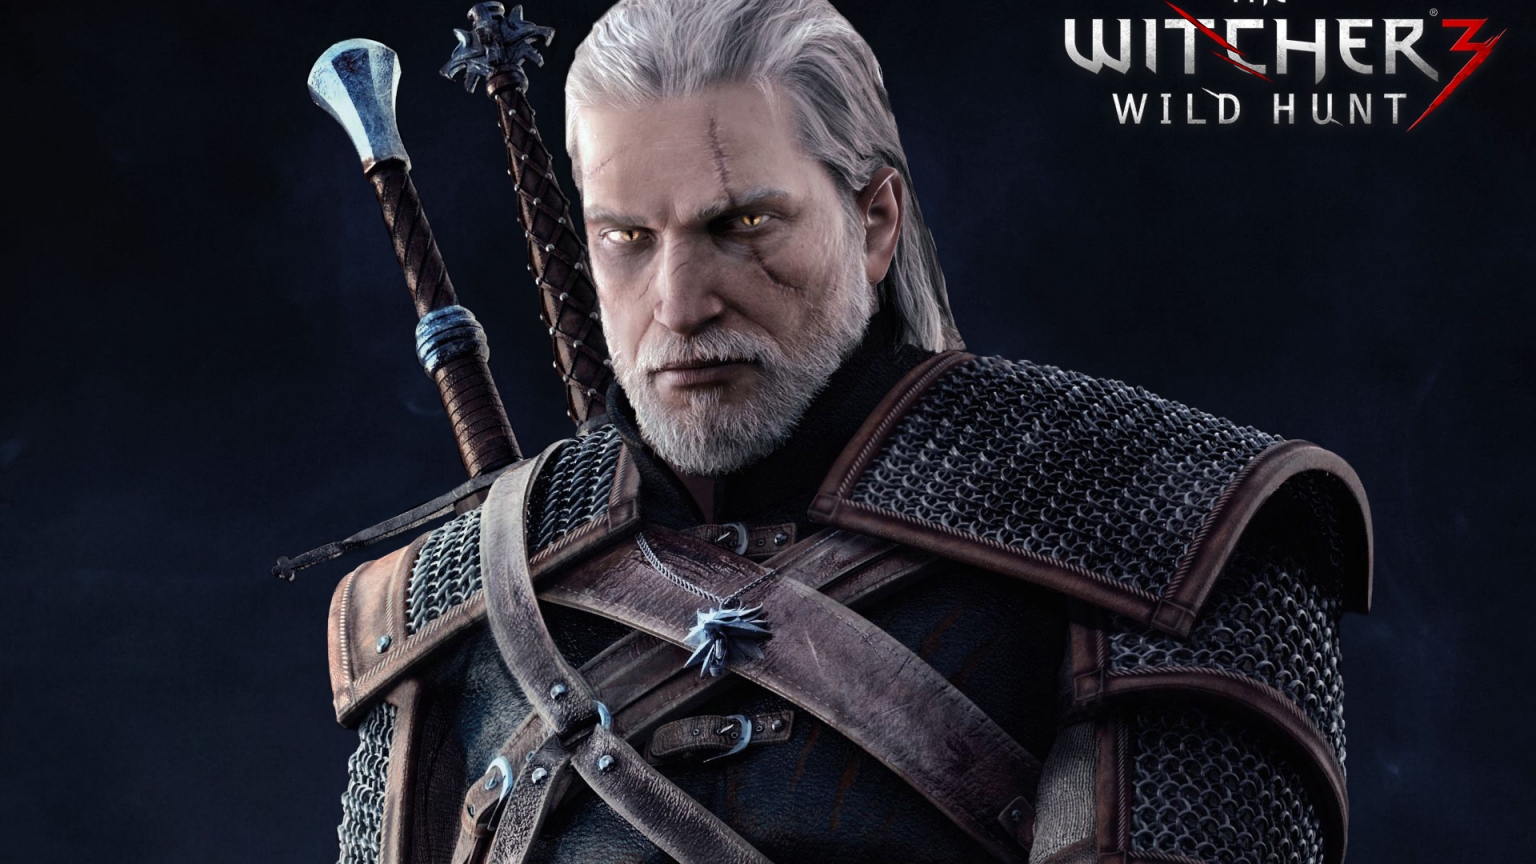 The Witcher 3 Wild Hunt Game for 1536 x 864 HDTV resolution